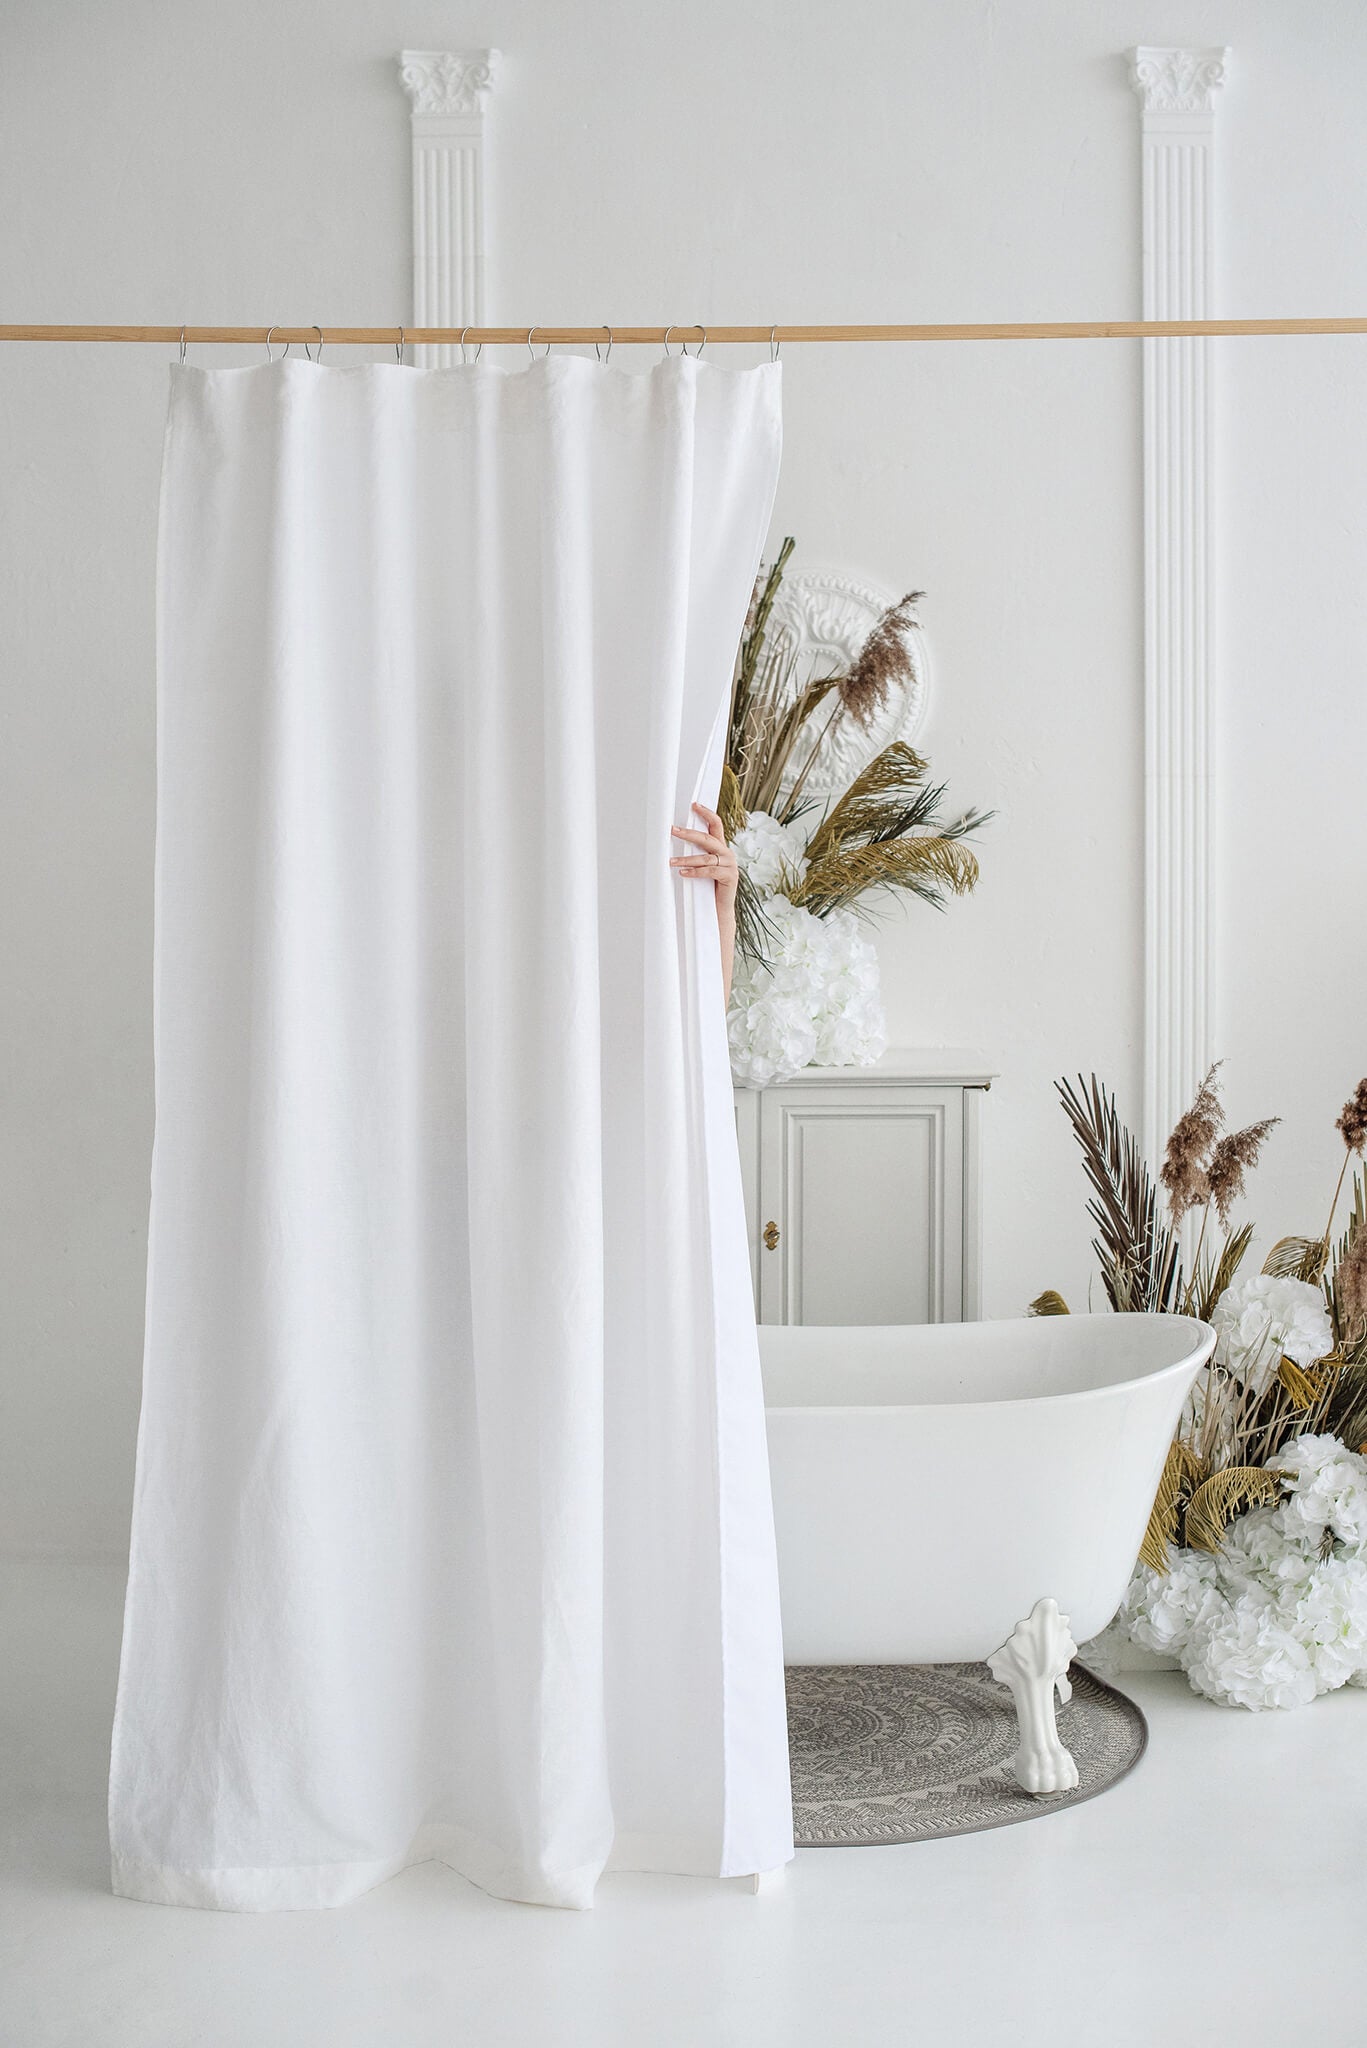 Linen Shower Curtain With Waterproof Lining In White Color Easy Crafts